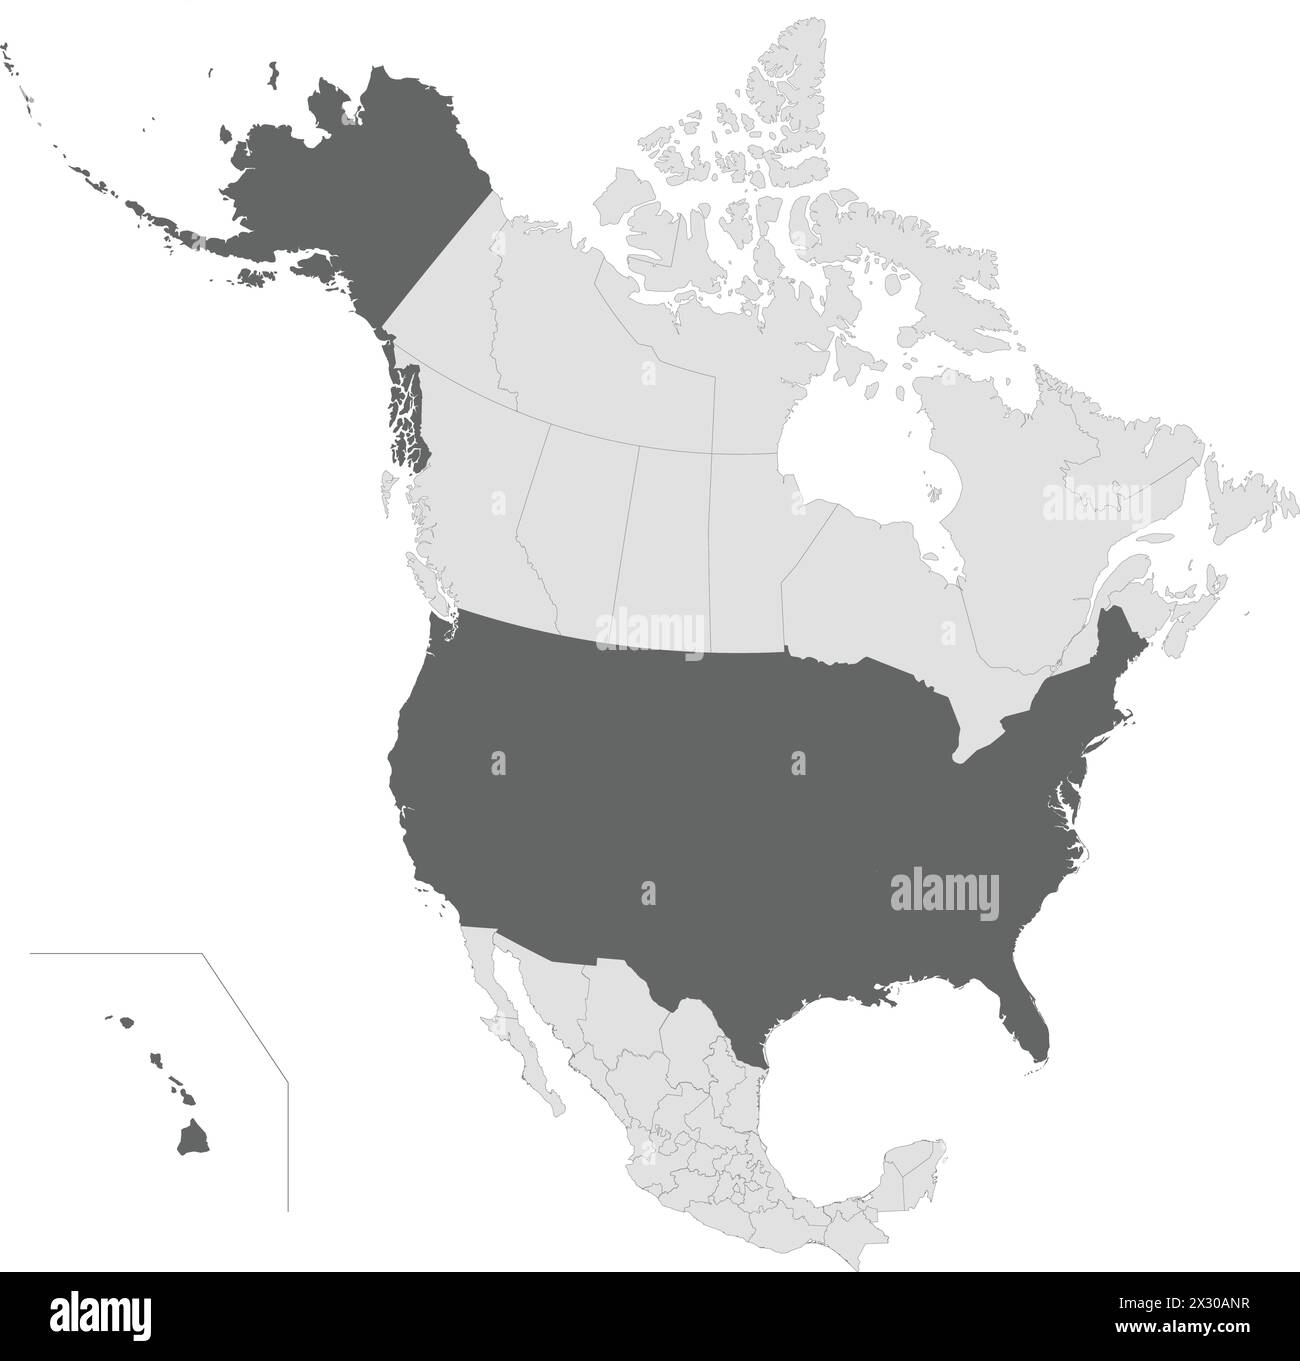 Dark grey map of the UNITED STATES inside light grey map of the North American continent Stock Vector